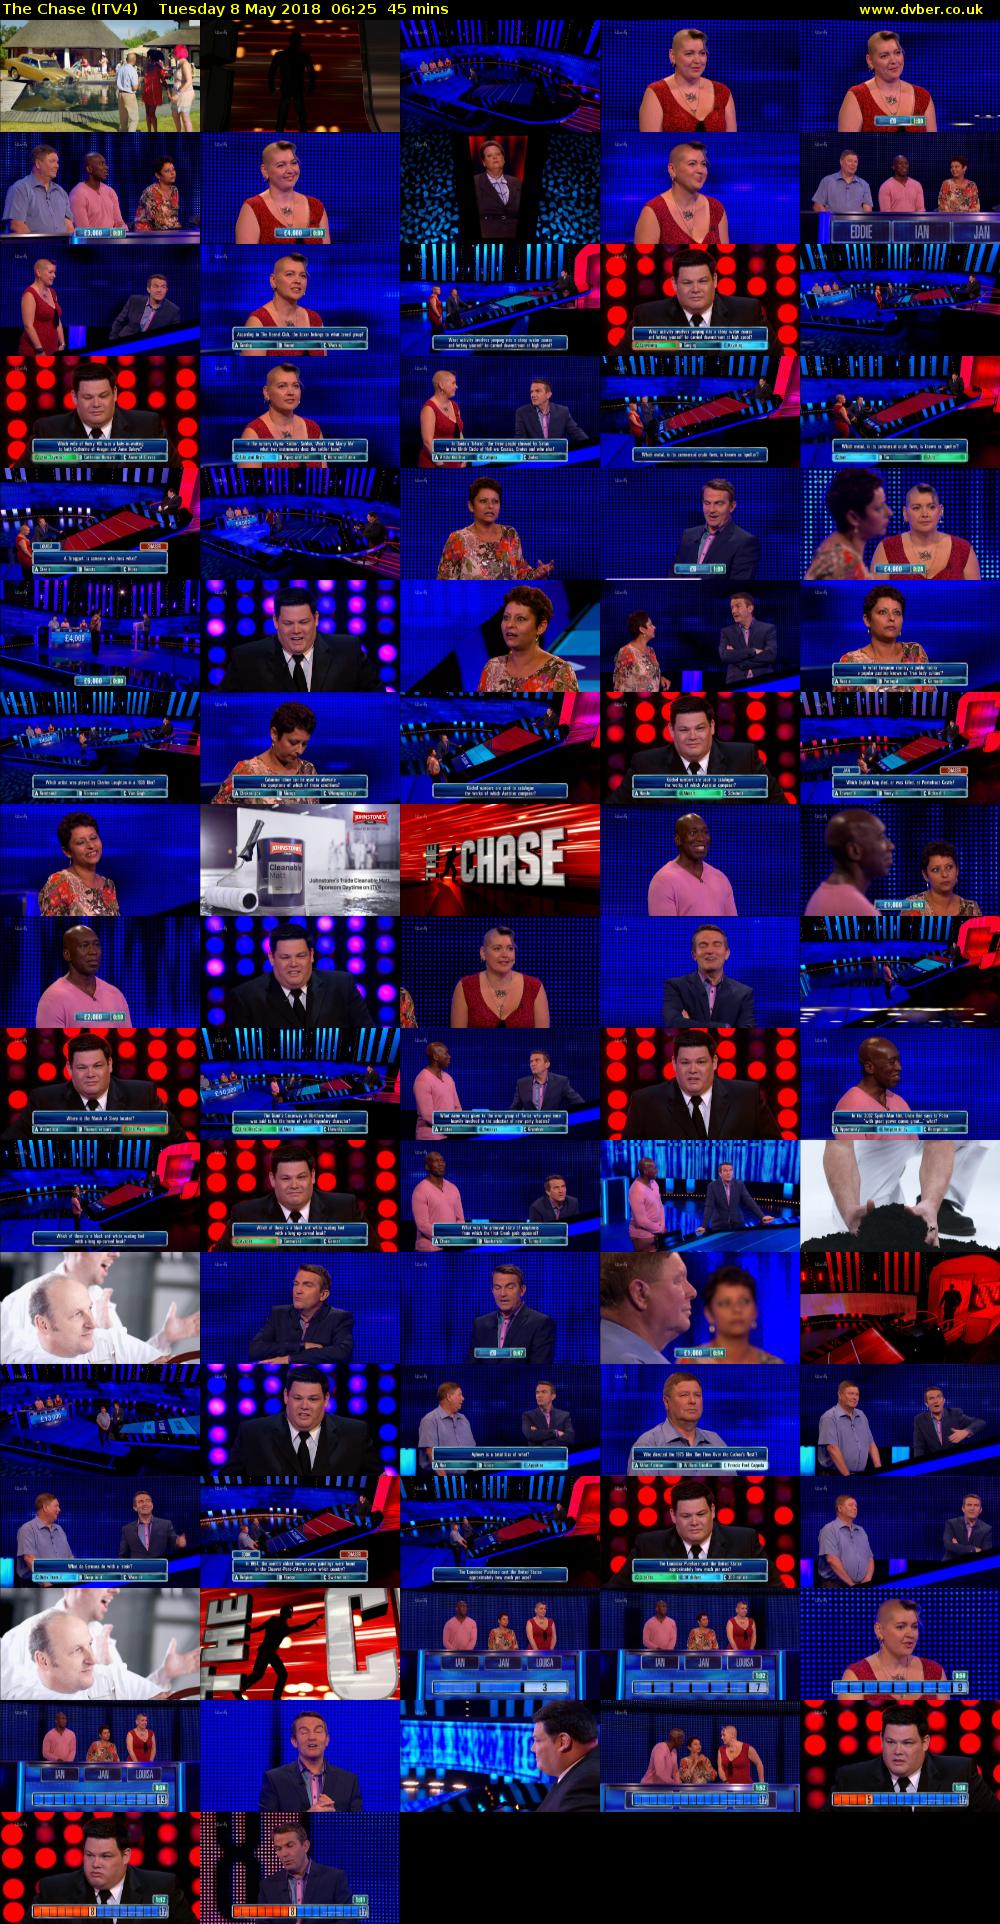 The Chase (ITV4) Tuesday 8 May 2018 06:25 - 07:10